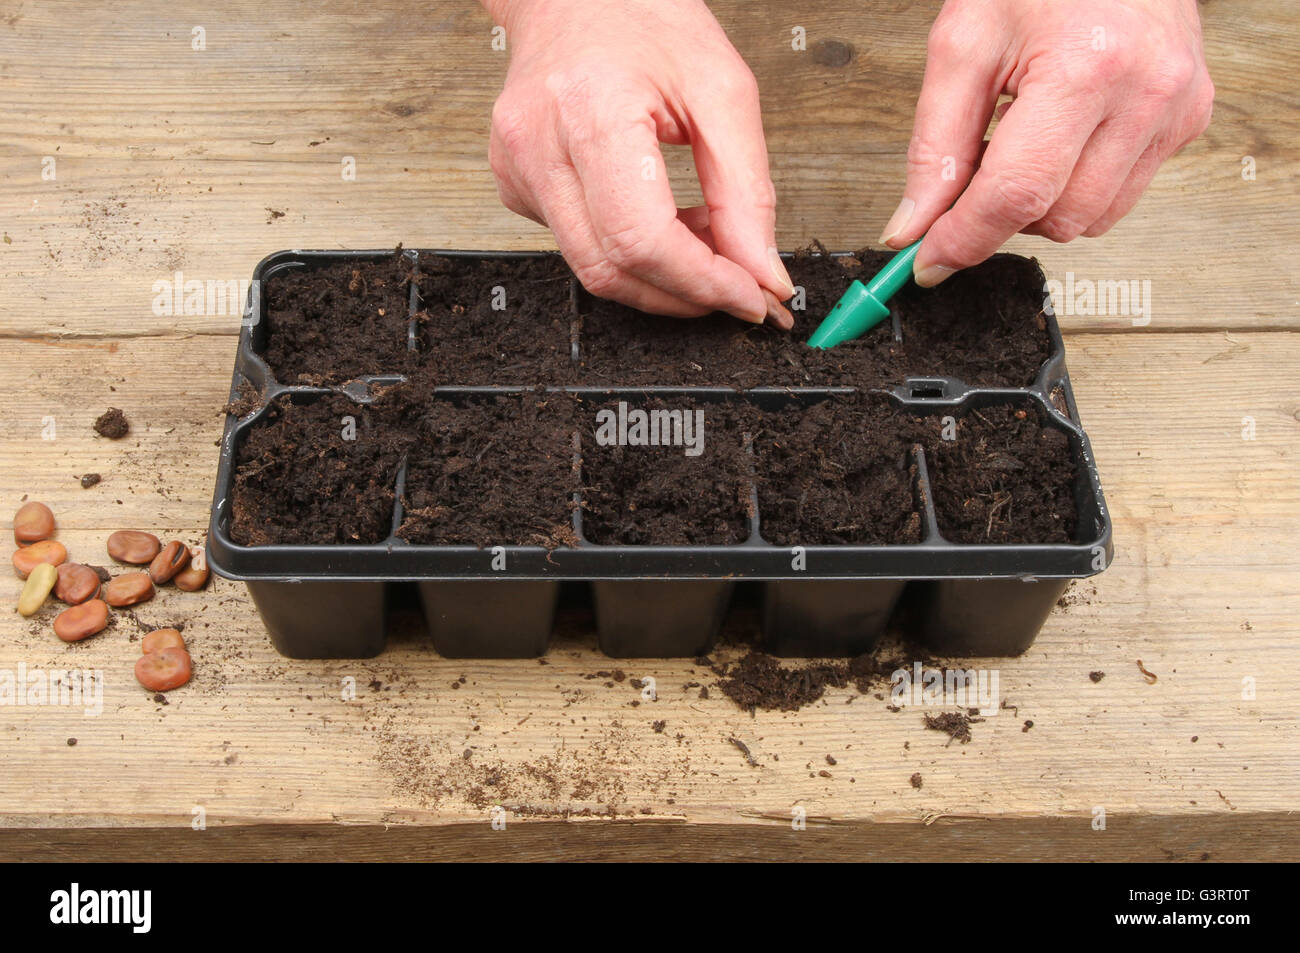 Closeup of hands planting broad bean seeds into a modular seed tray on a wooden potting bench Stock Photo